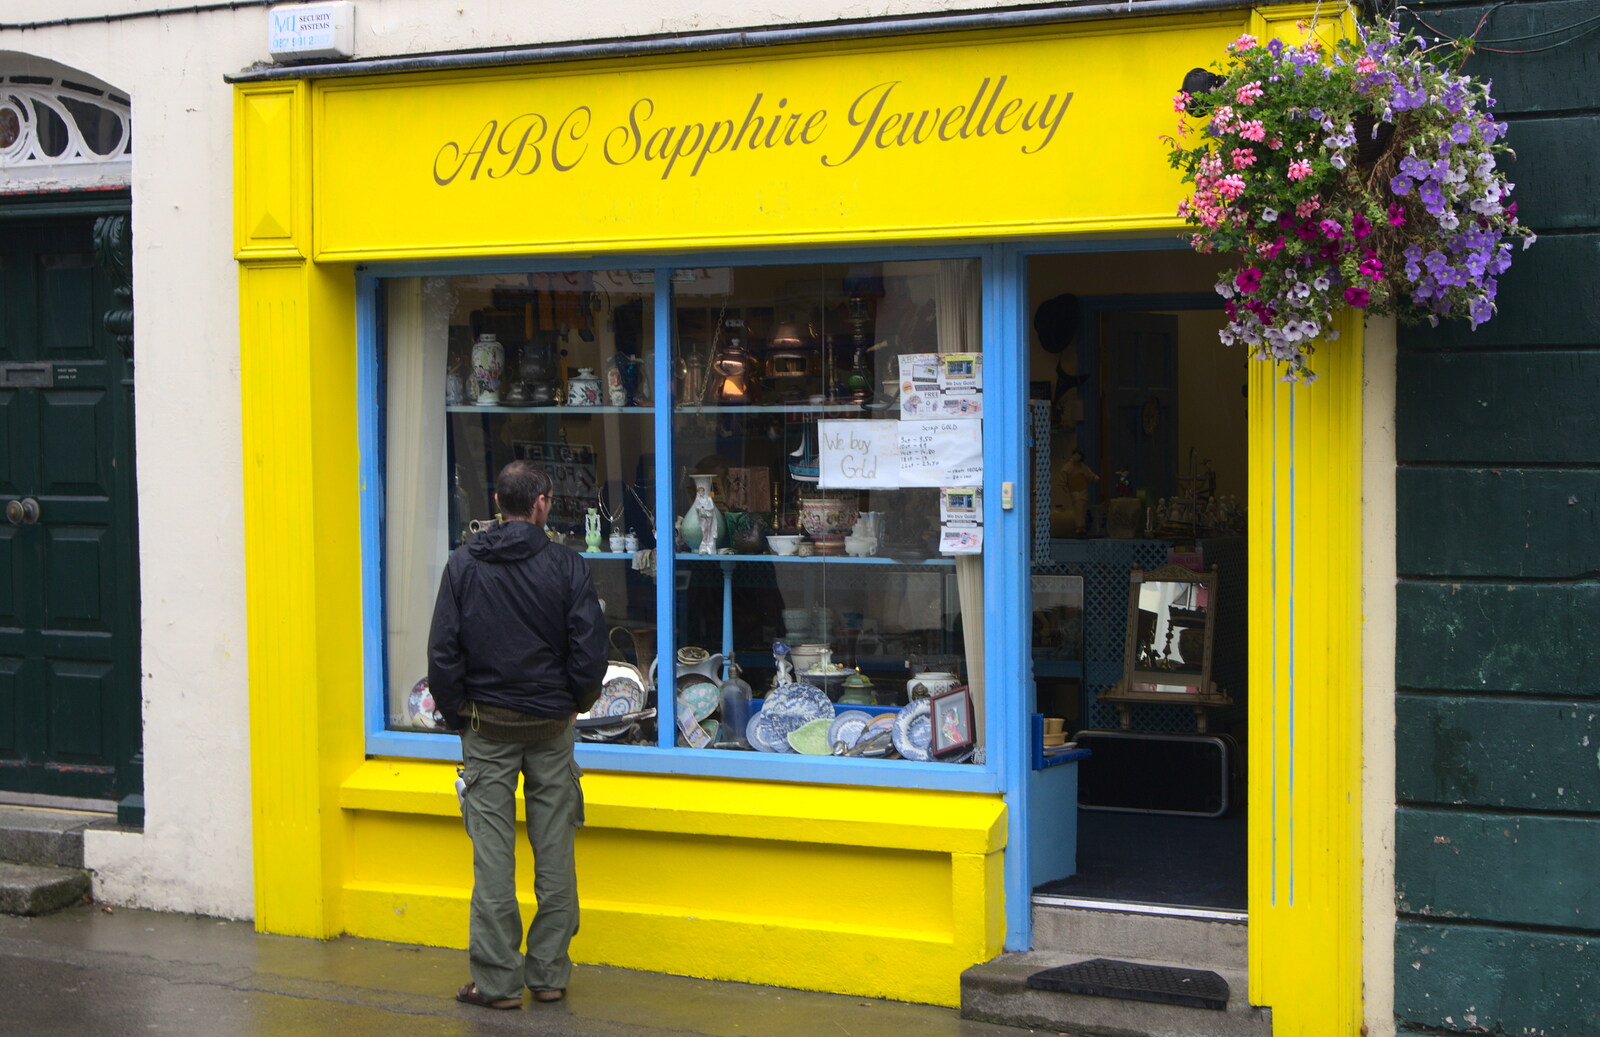 Philly looks in a shop window from Camping at Silver Strand, Wicklow, County Wicklow, Ireland - 7th August 2014